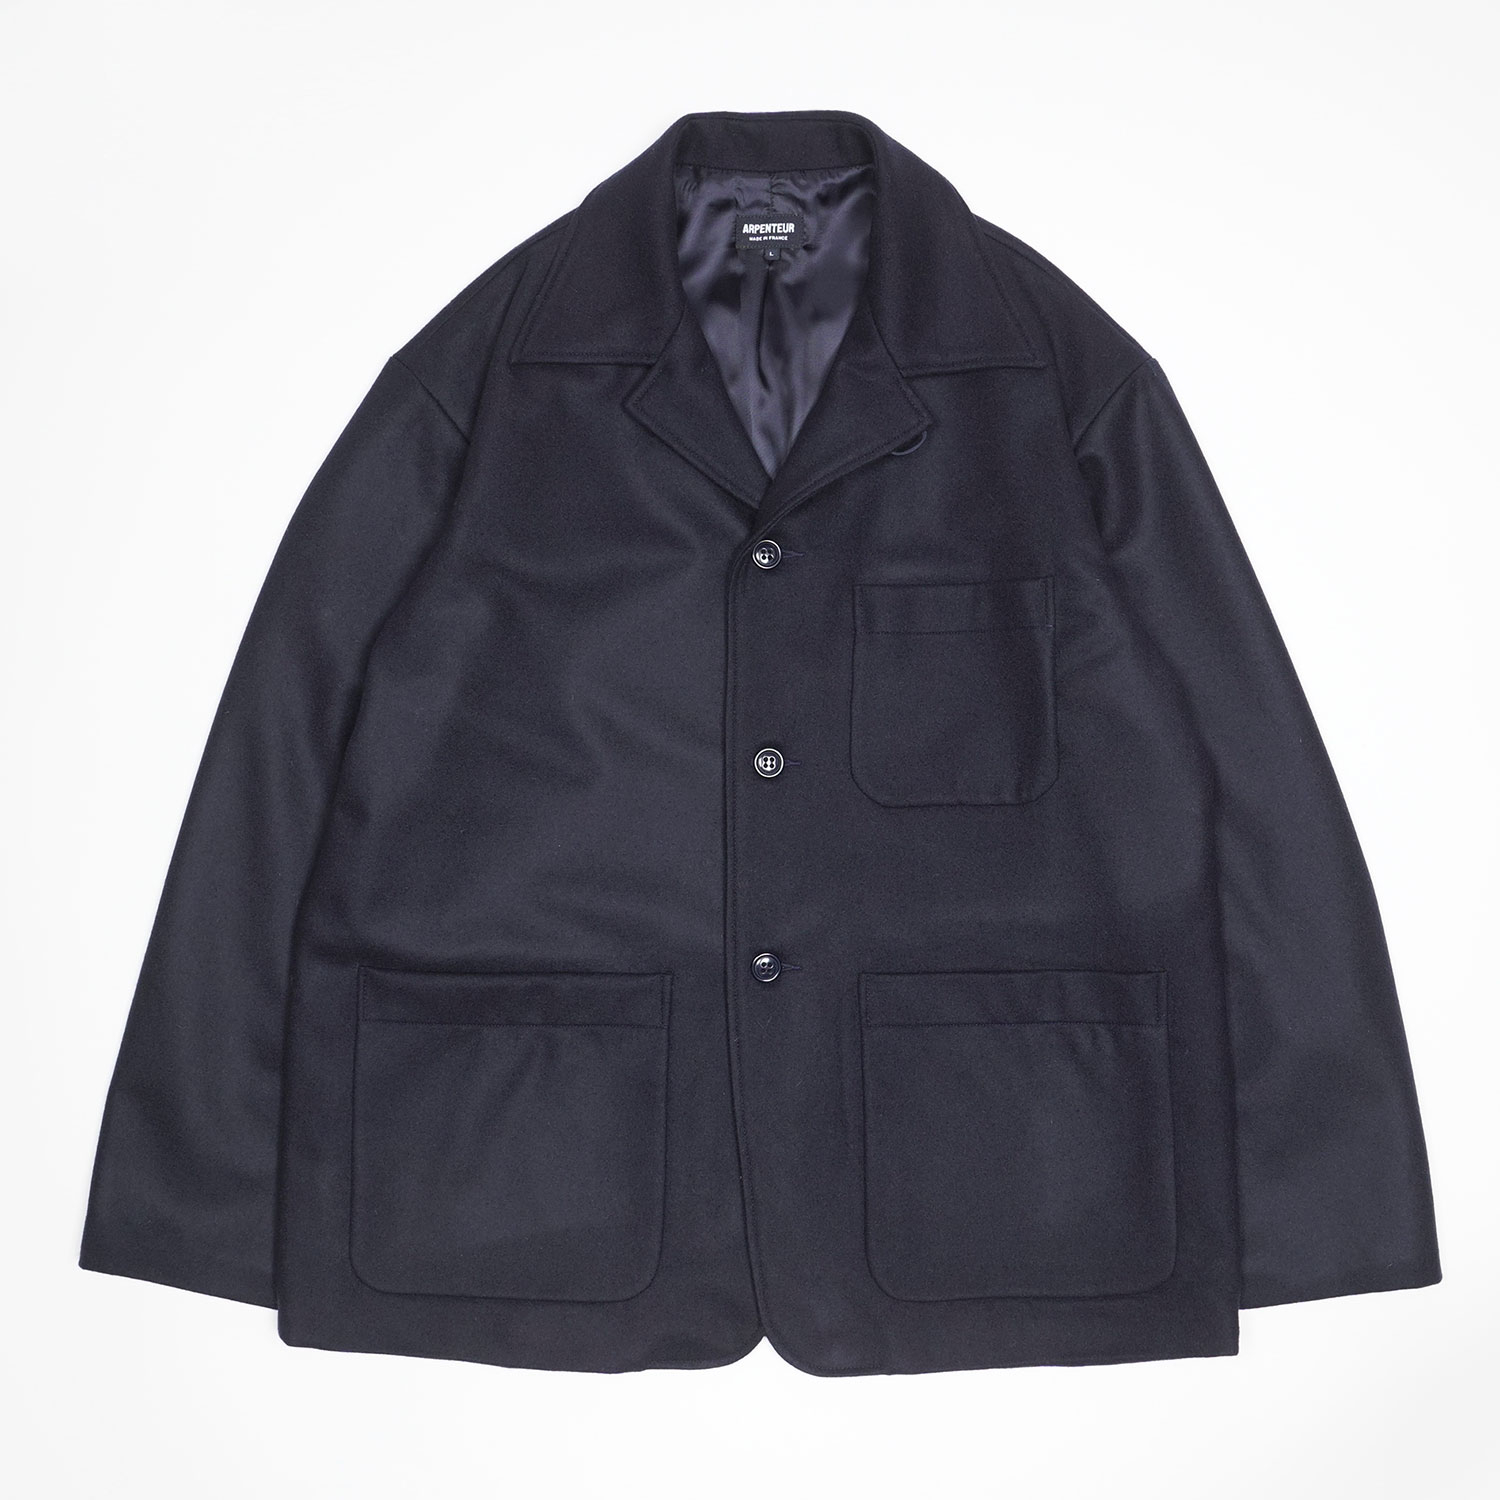 FOX Jacket in Midnight blue color by Arpenteur